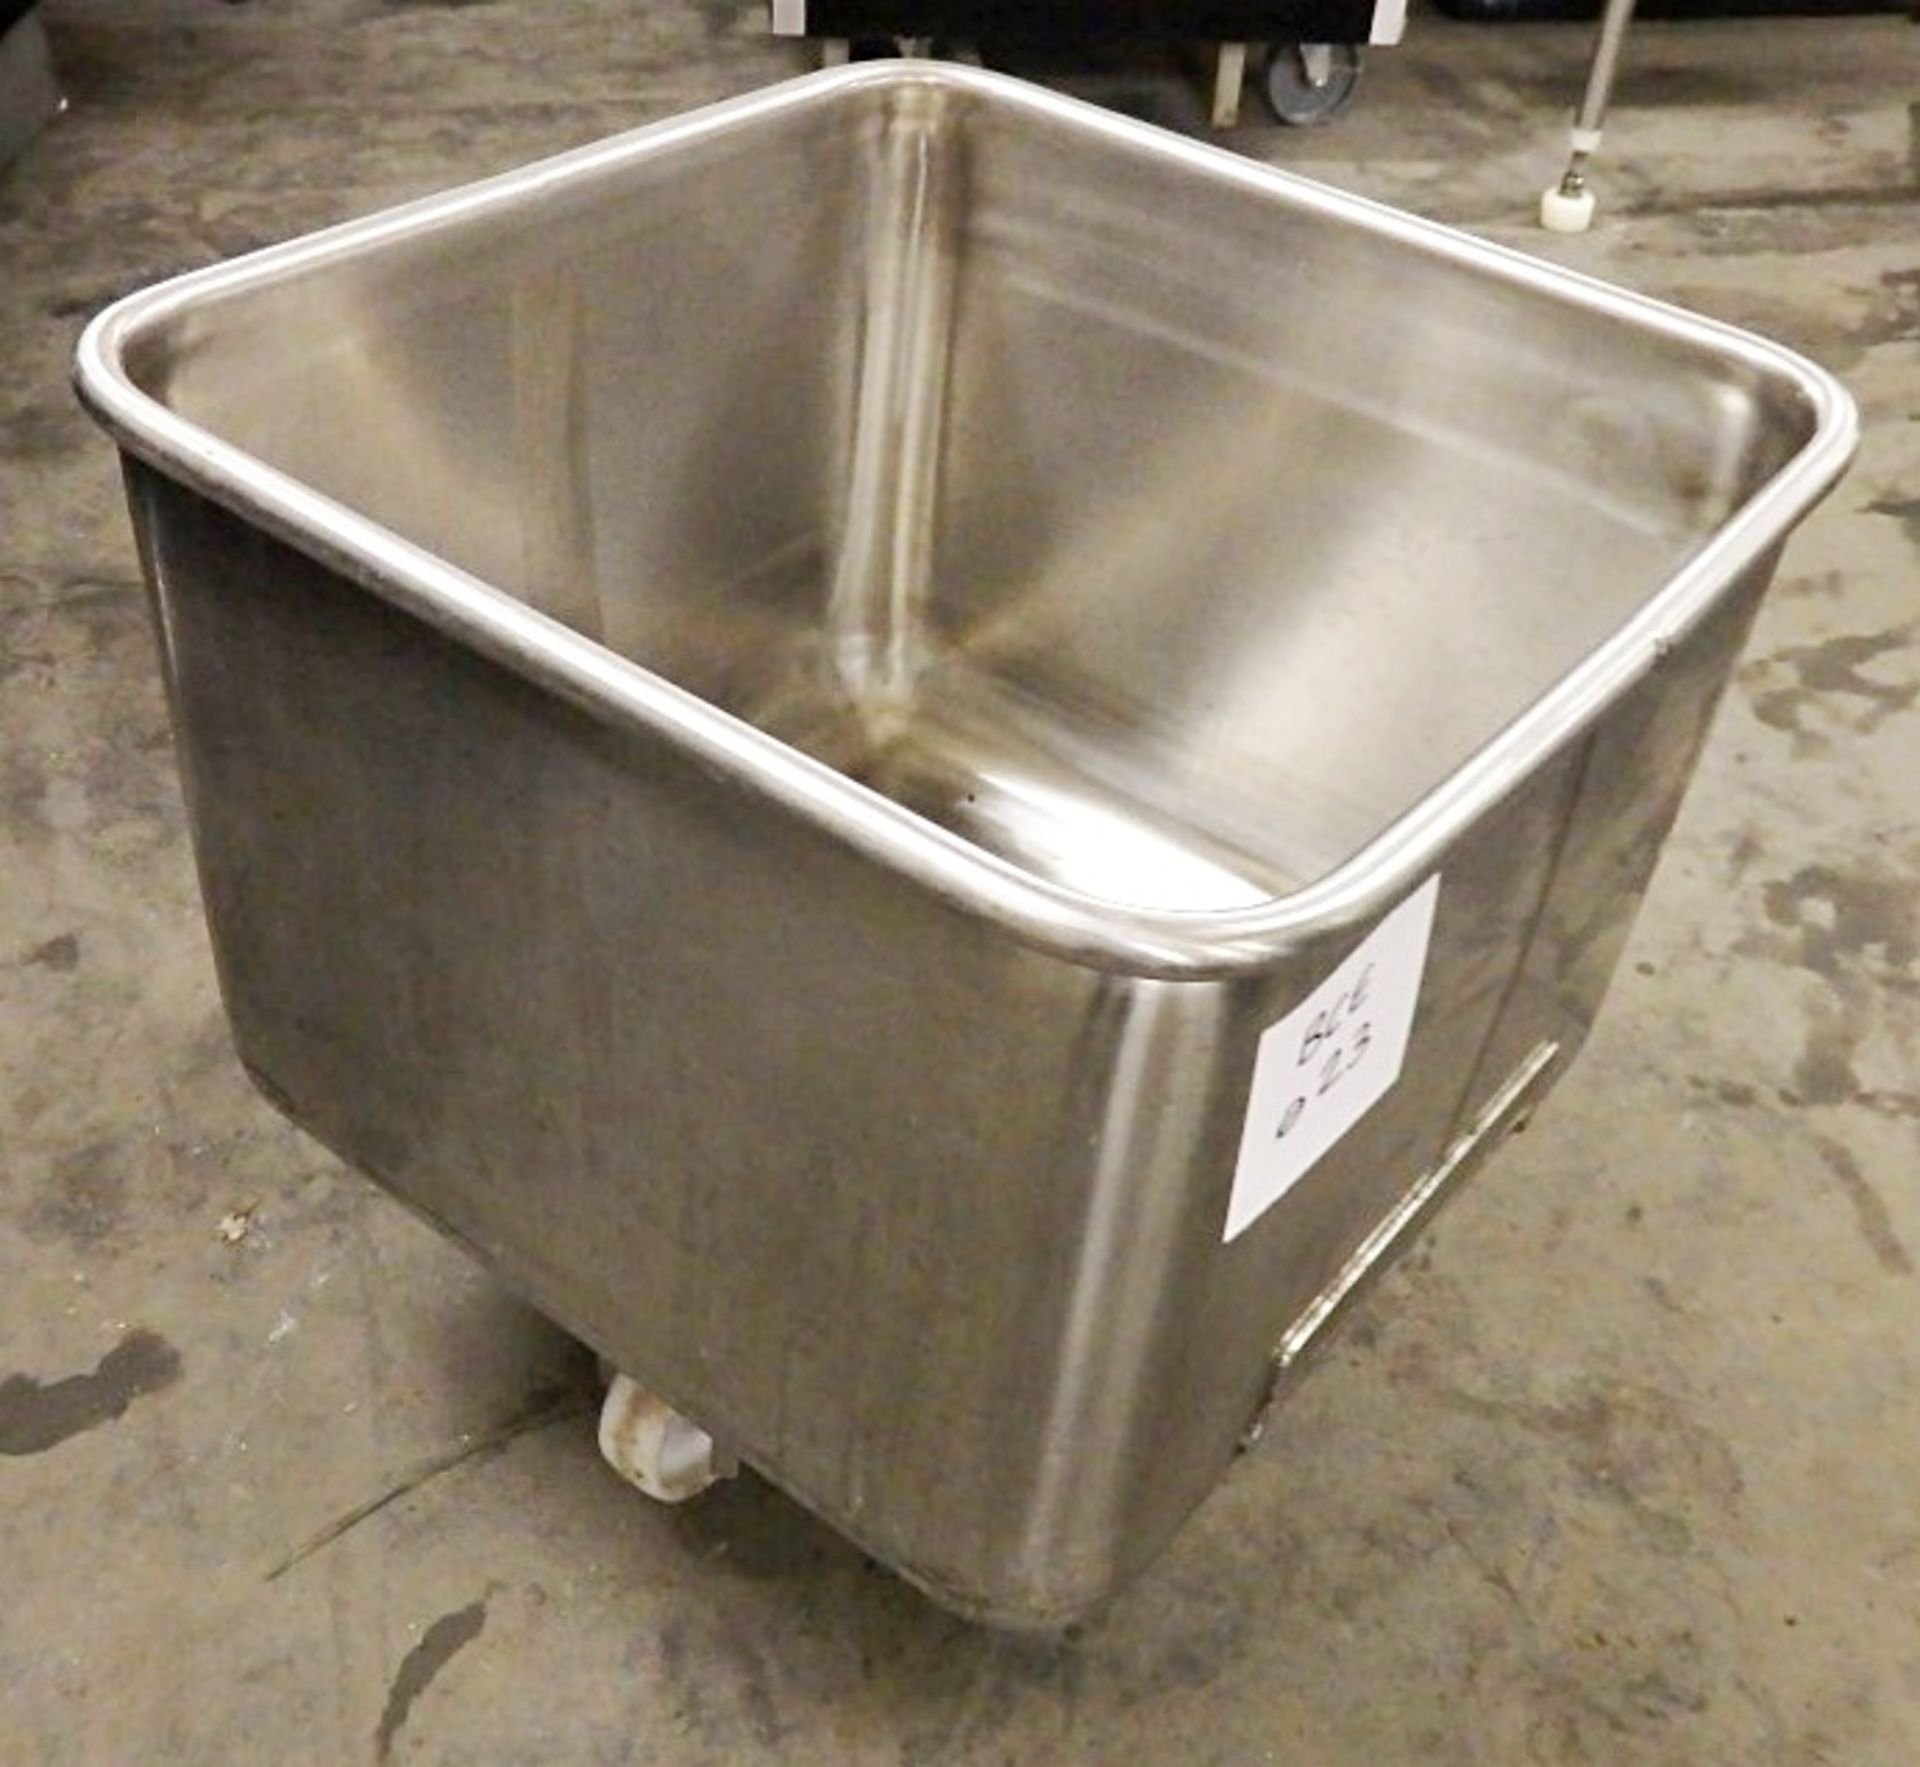 1 x Stainless Steel Catering Container On Castors With Handle - Dimensions: W58 x D58 x H58cm - Ref: